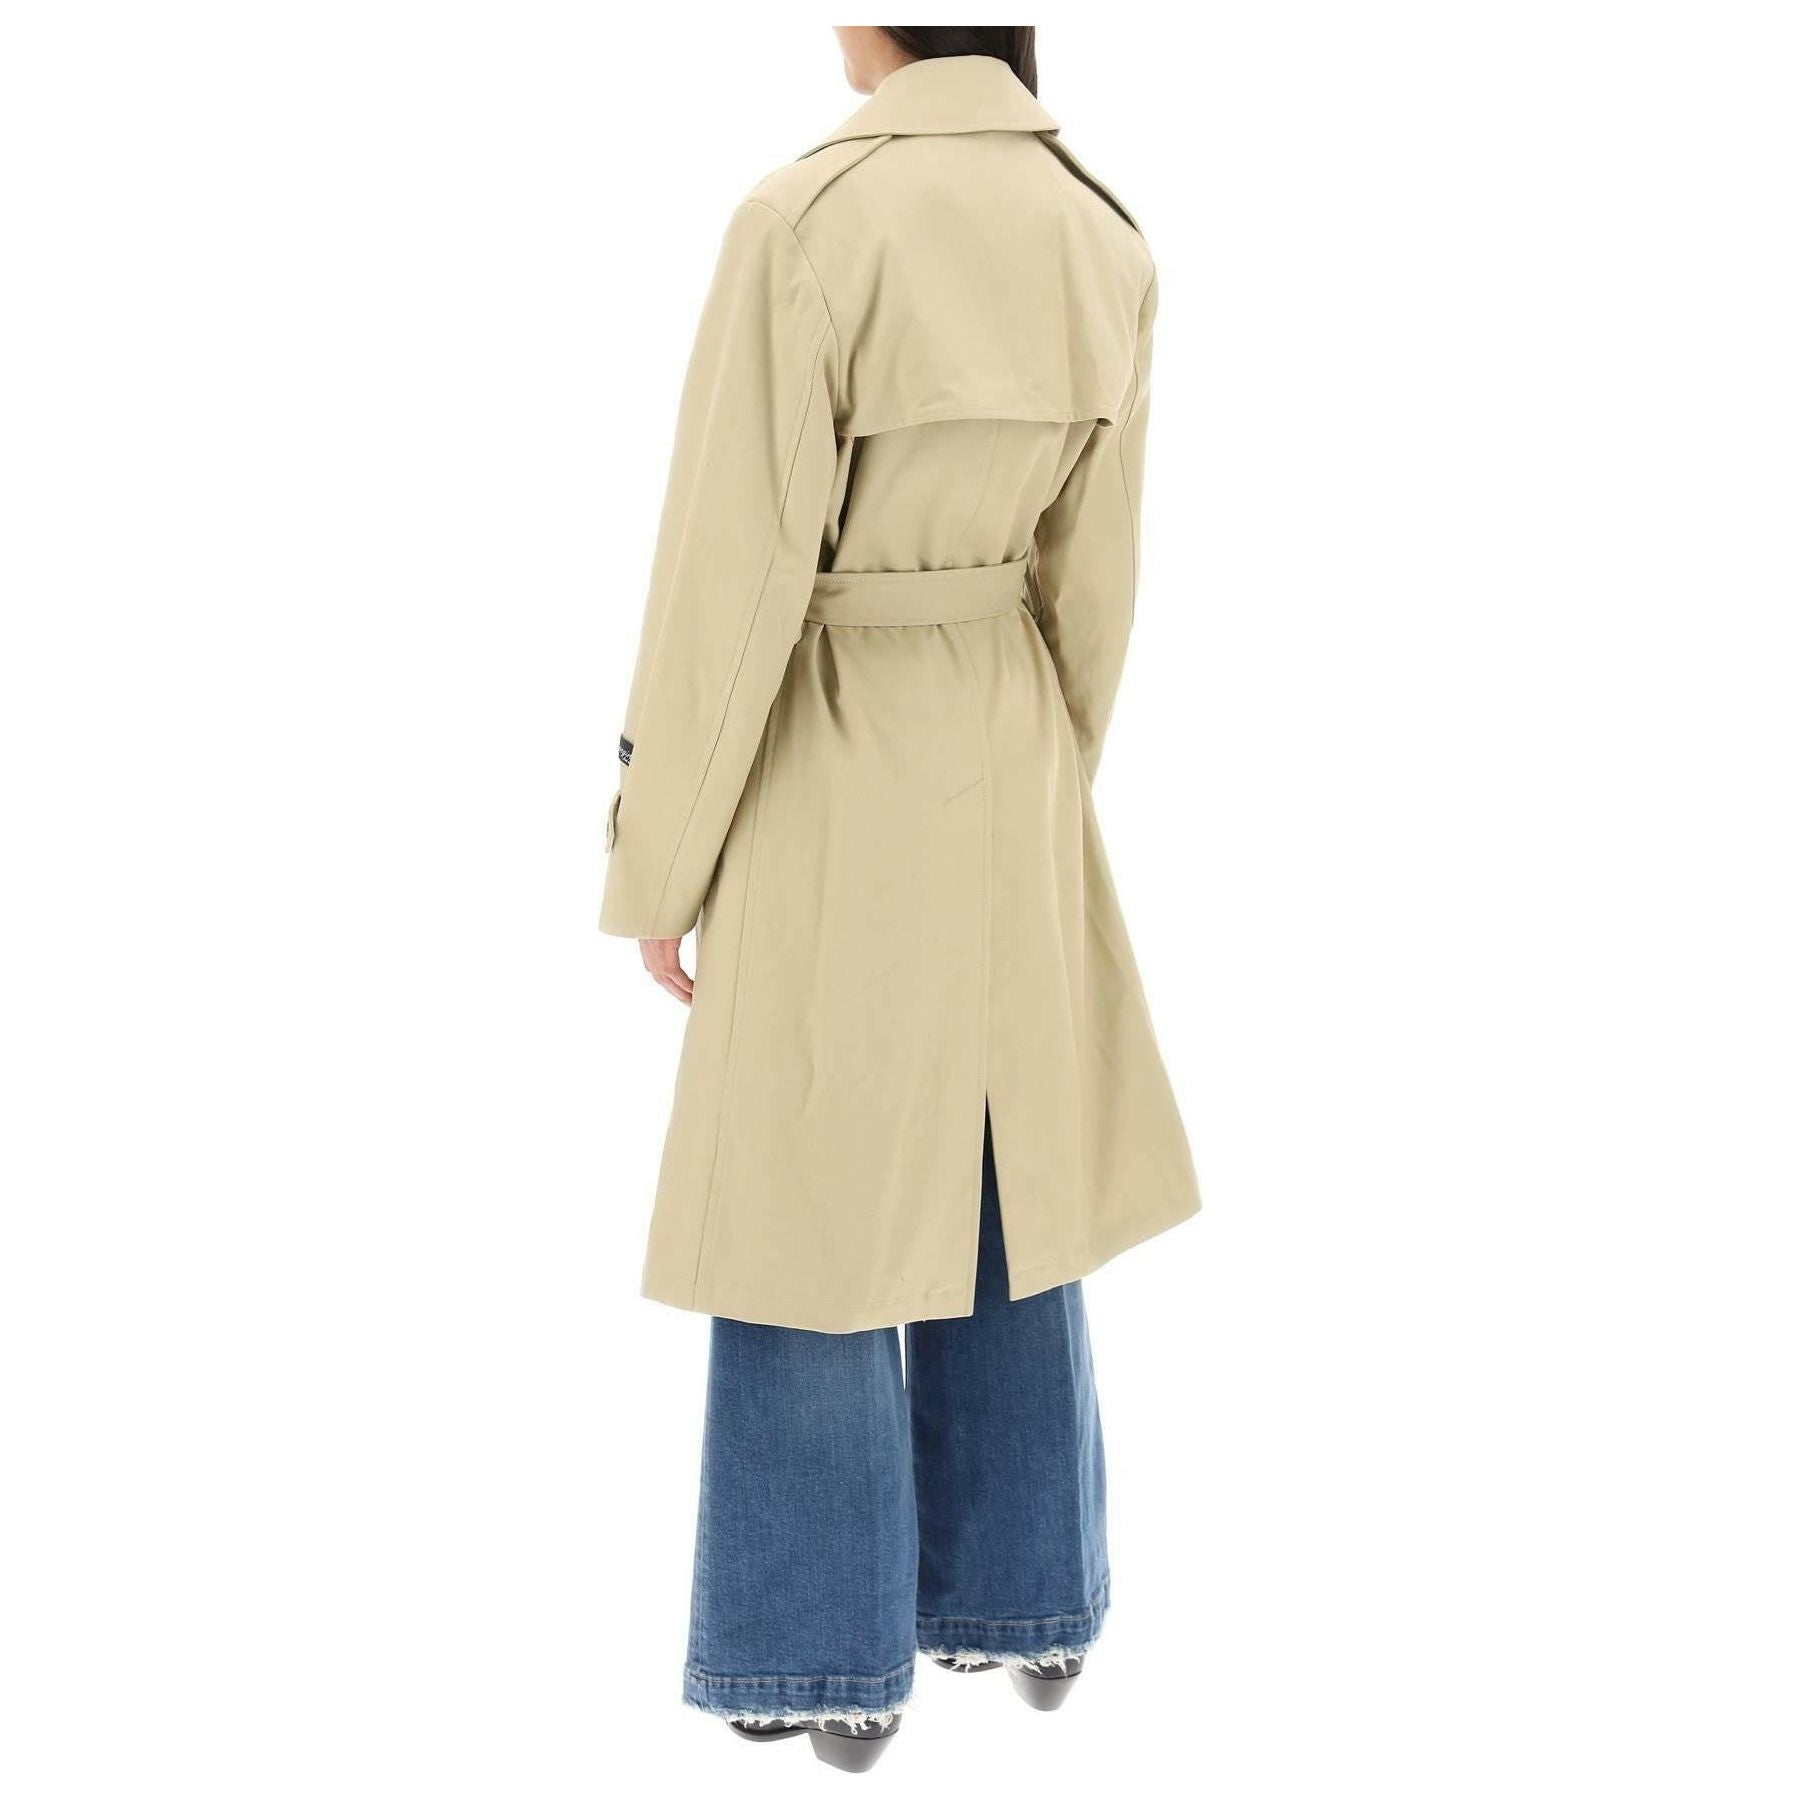 Cotton Double-Breasted Trench Coat HOMME GIRLS JOHN JULIA.